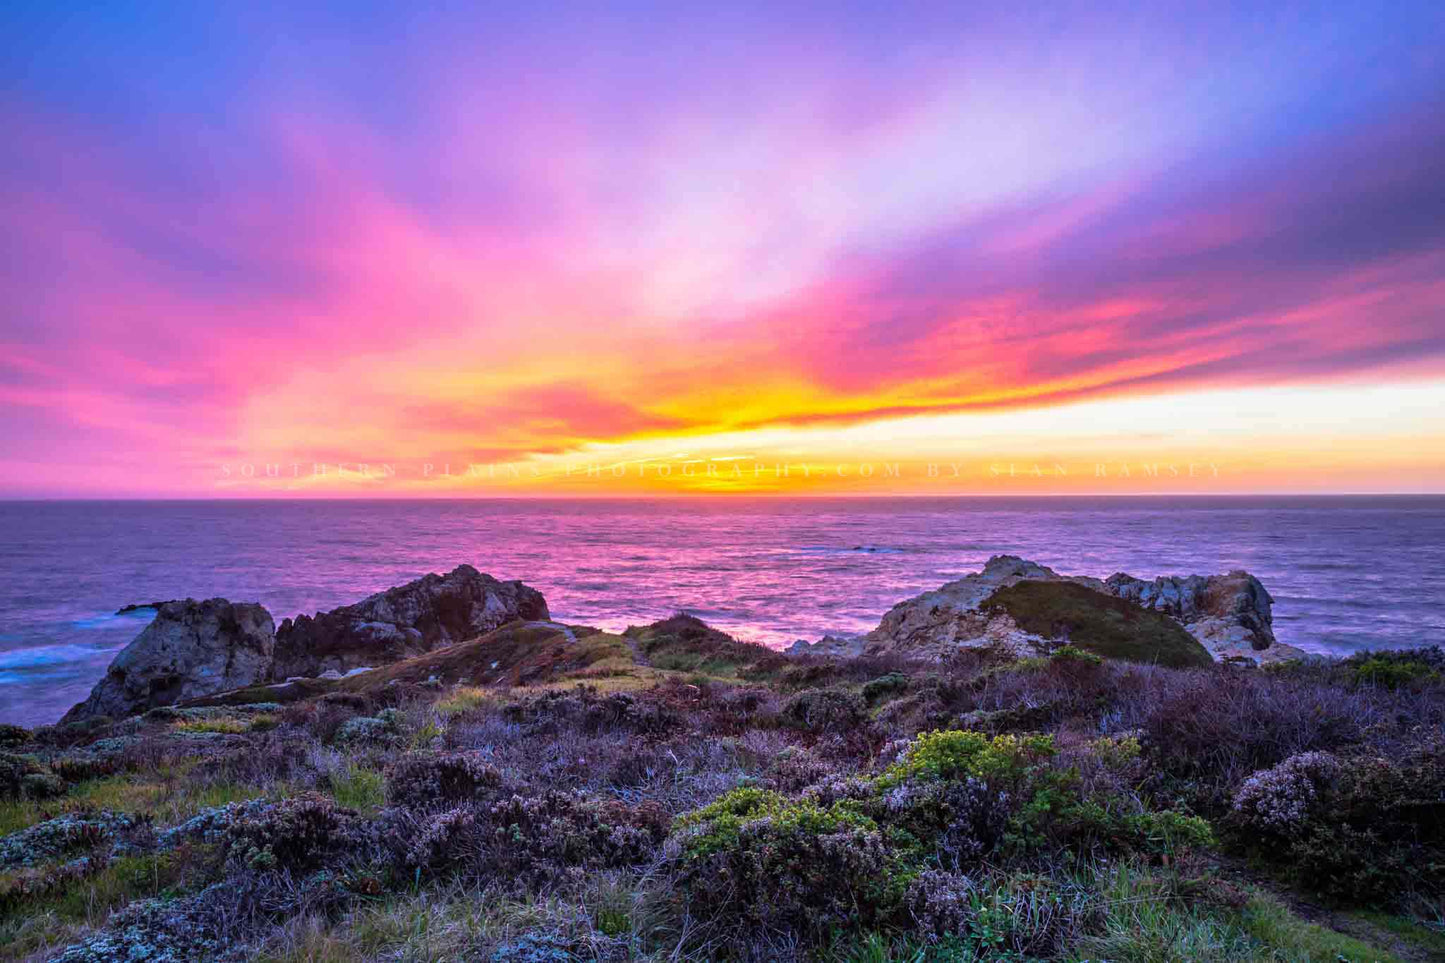 Seascape photography print of a scenic sunset over the Pacific Ocean along the Big Sur Coast in California by Sean Ramsey of Southern Plains Photography.